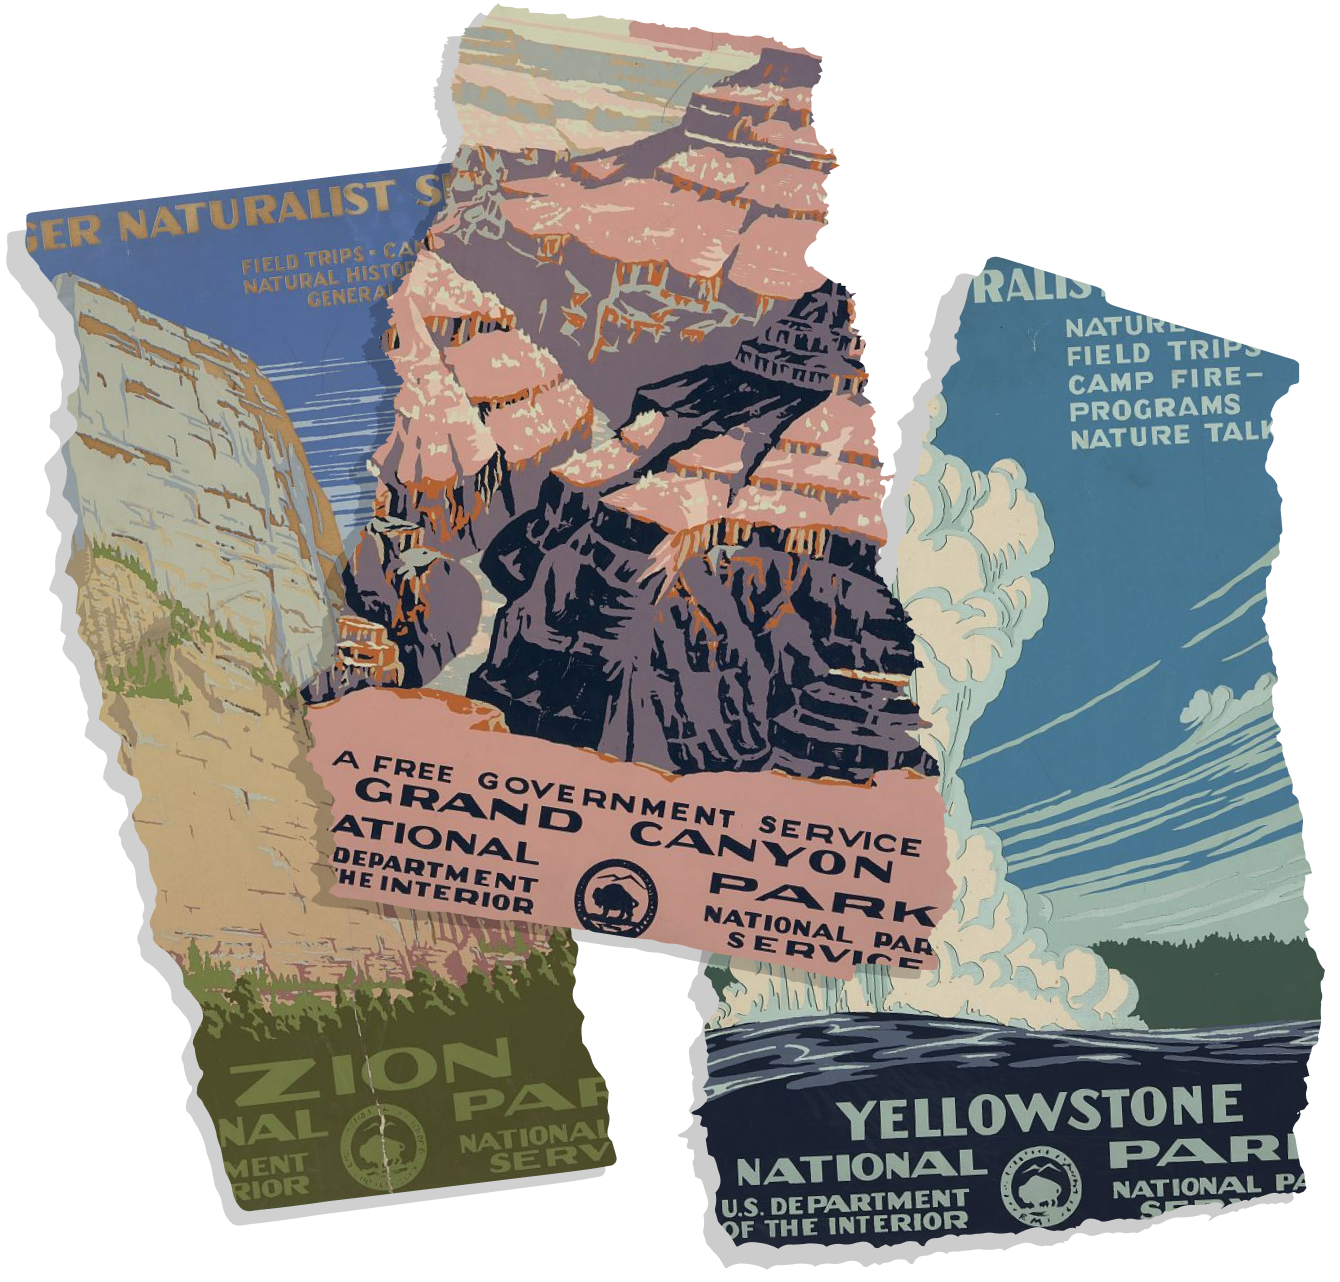 <b class="accent">FIG. 1 — </b> Original WPA Posters featuring (left to right) Zion, Grand Canyon, and Yellowstone National Parks. Artist C. (Chester) Don Powell and printed by Dale Miller. [ca. 1938]. [Source: Library of Congress.](https://www.loc.gov/pictures/search/?st=grid&co=wpapos) See carousel below for full poster designs.